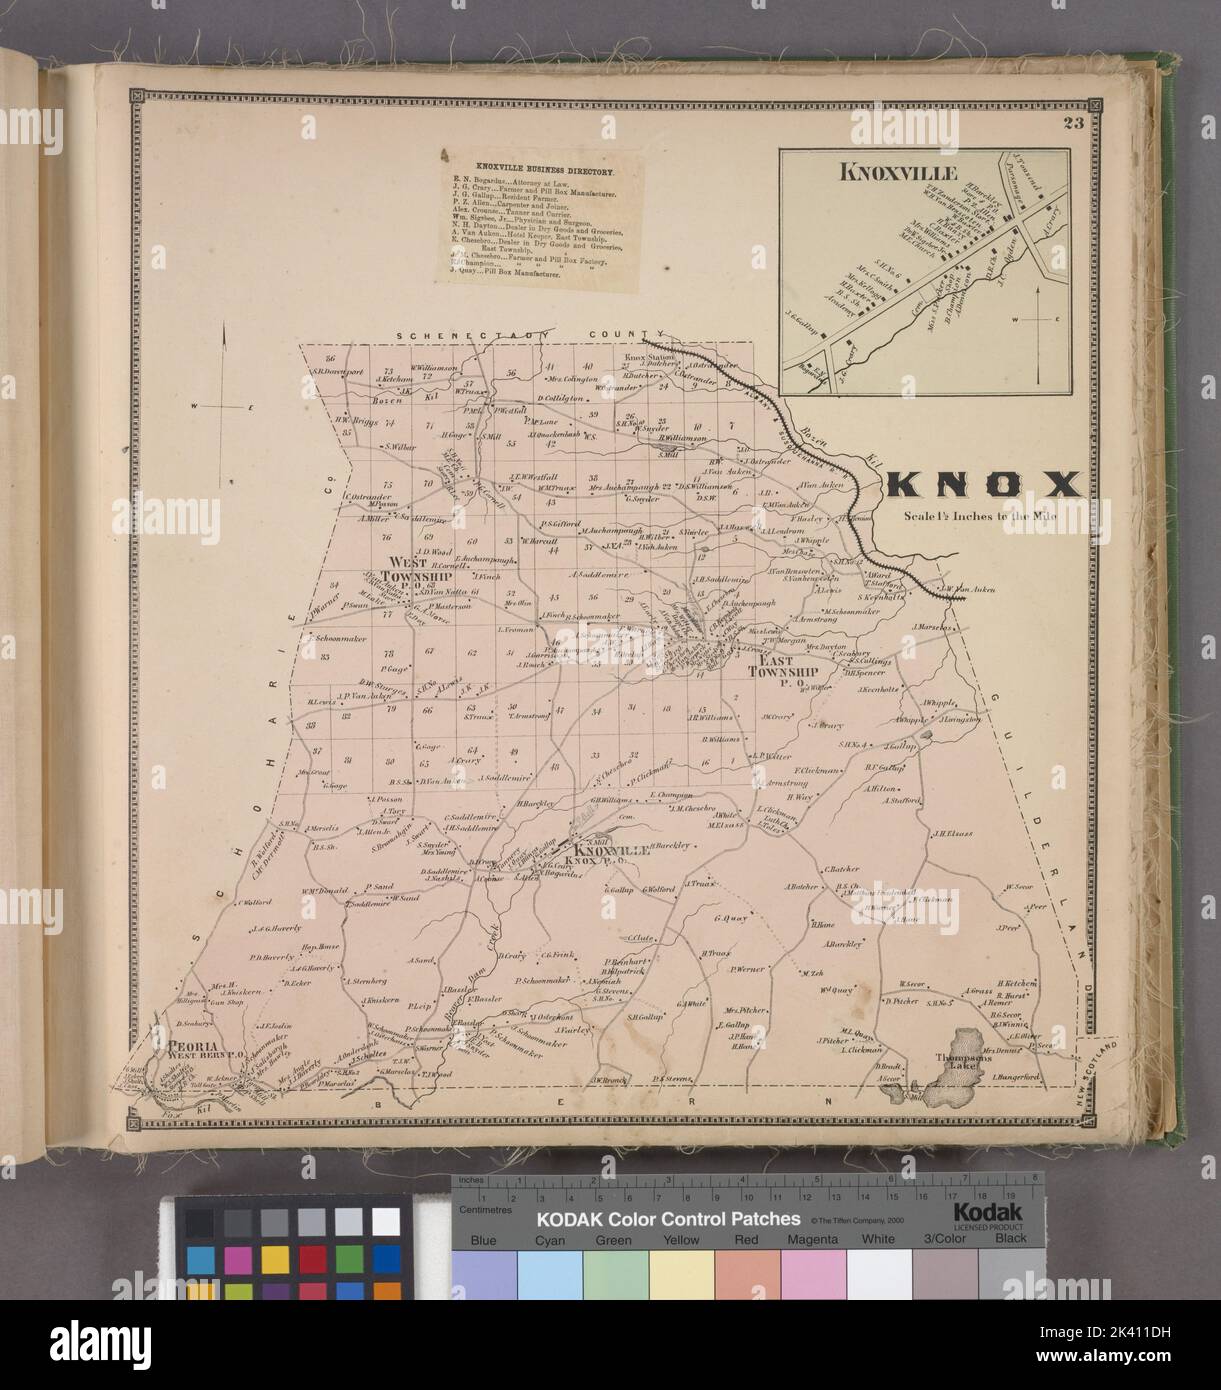 Knoxville Business Directory; Knoxville Village; Knox Township Cartographic. Atlases, Maps. 1866. Lionel Pincus and Princess Firyal Map Division. Albany County (N.Y.), Knox (N.Y. : Town) Stock Photo